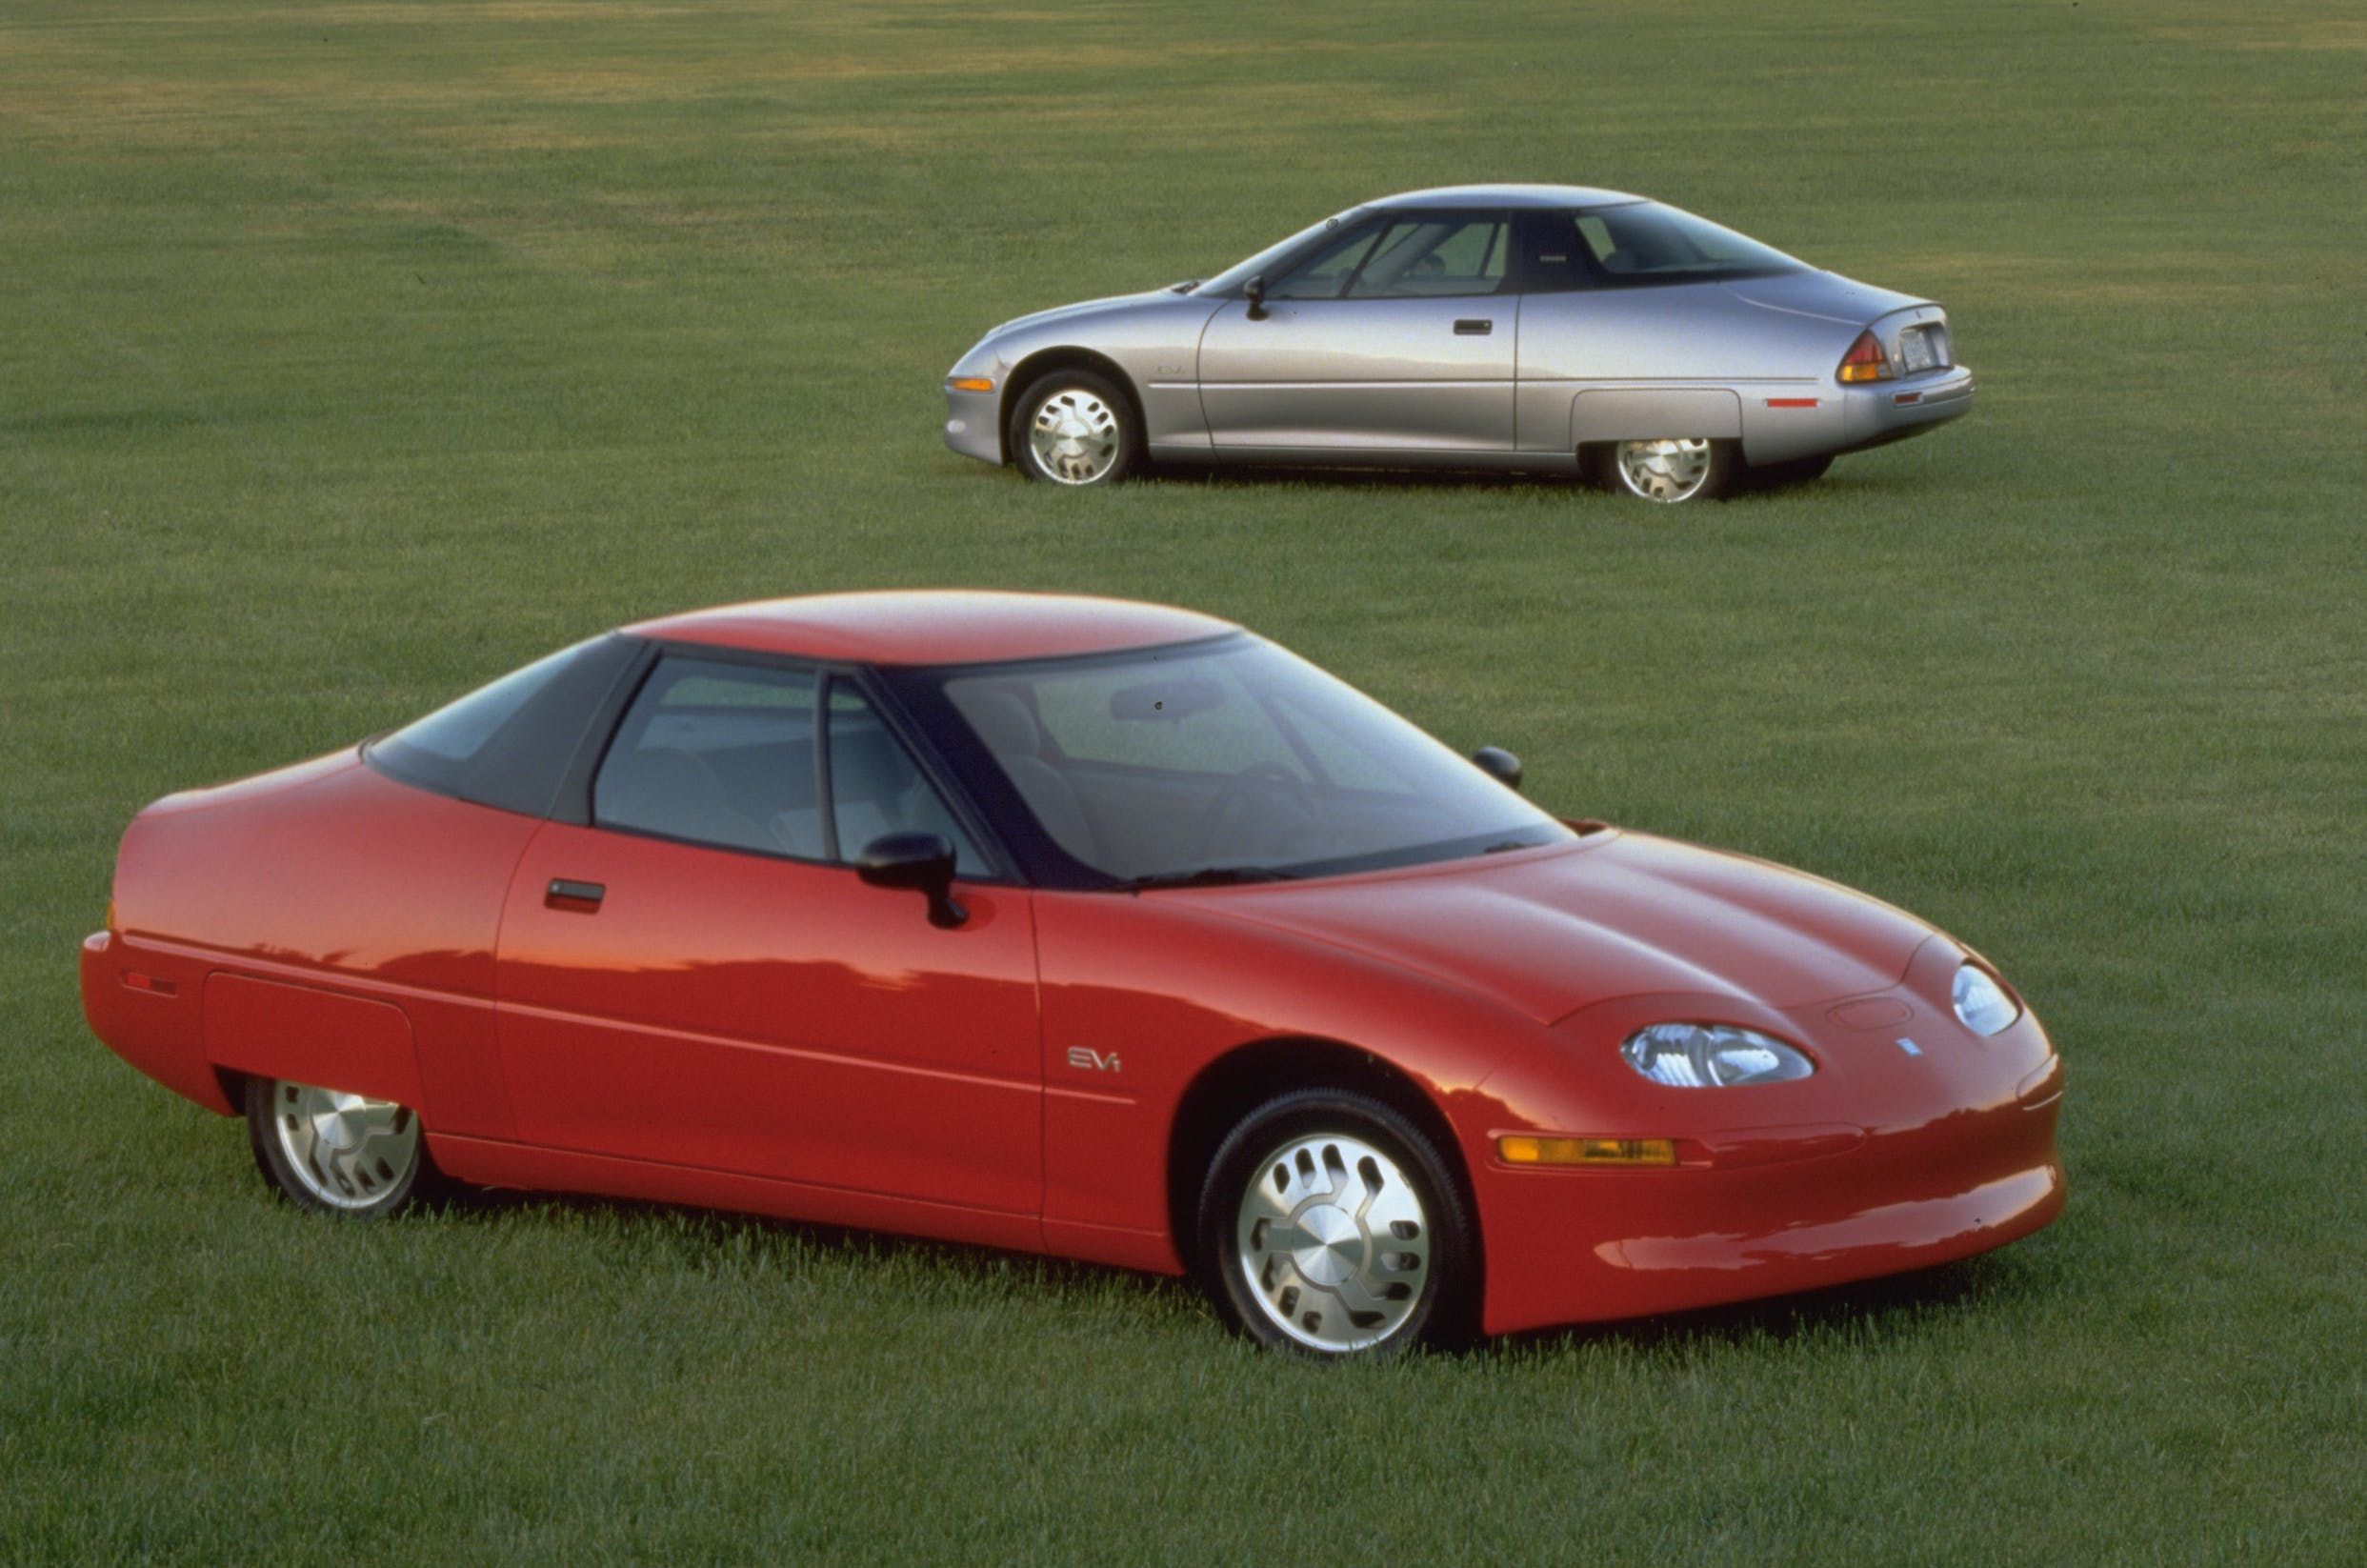 Red and silver GM Ev1 cars parked in a grassy field.